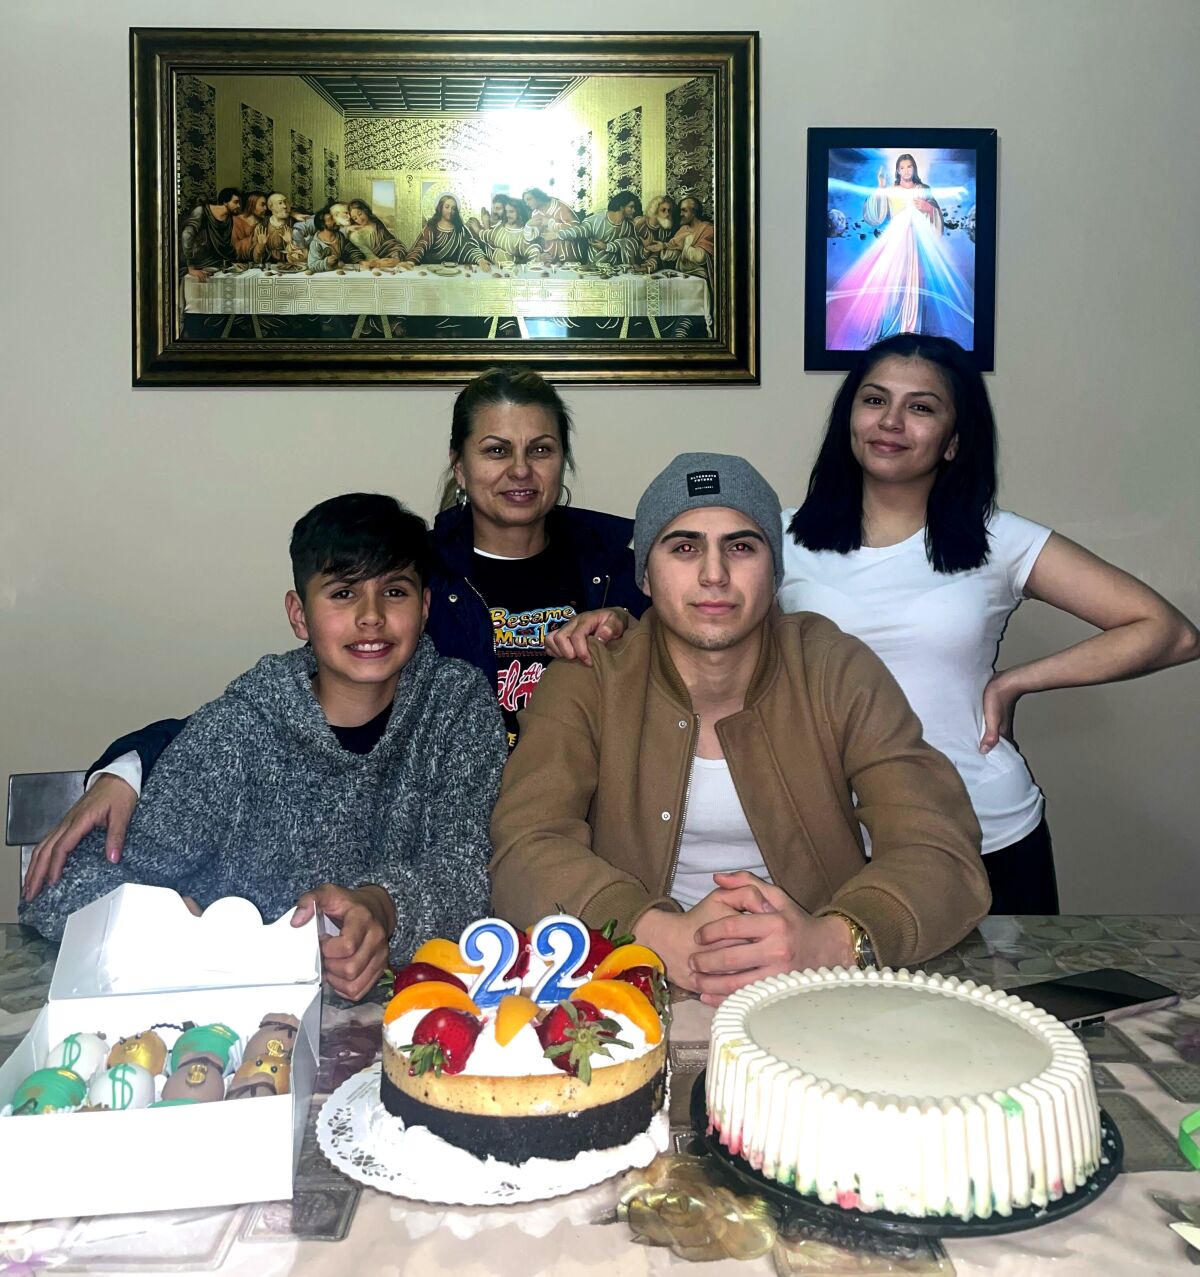 Yolanda Reyna and her three kids at a table with a birthday cake